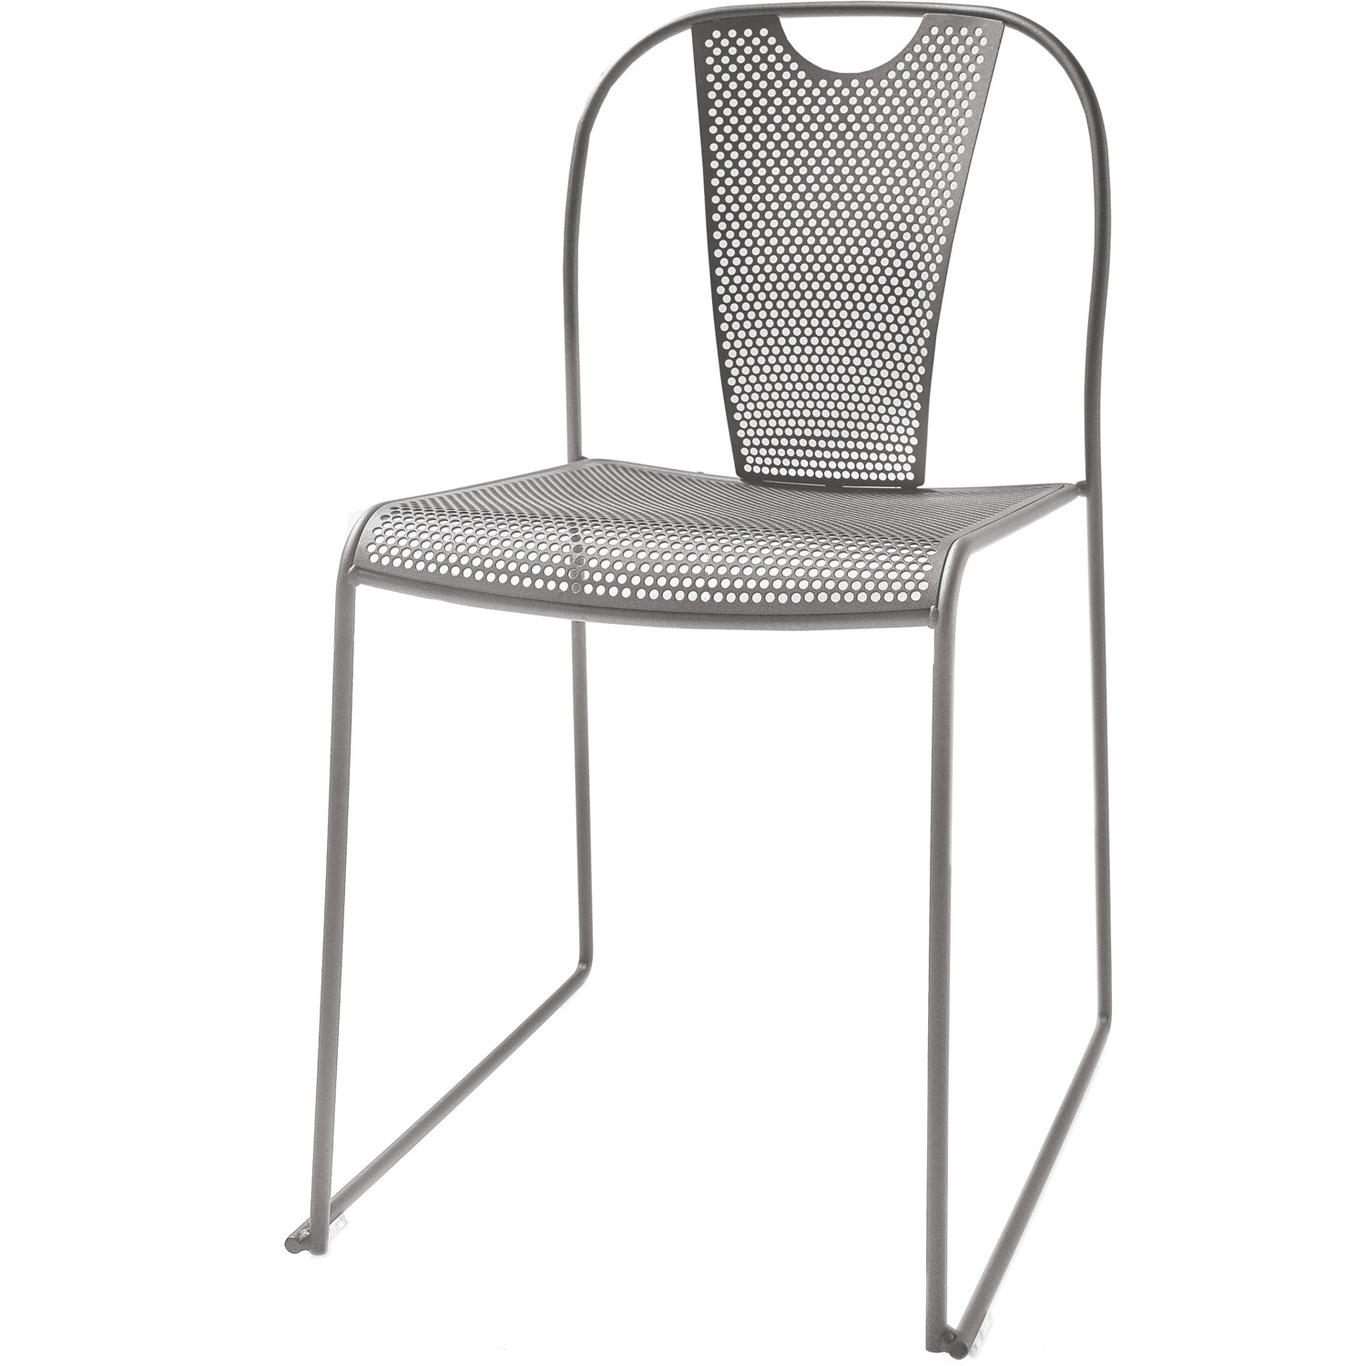 Piazza Chair, Light Gray